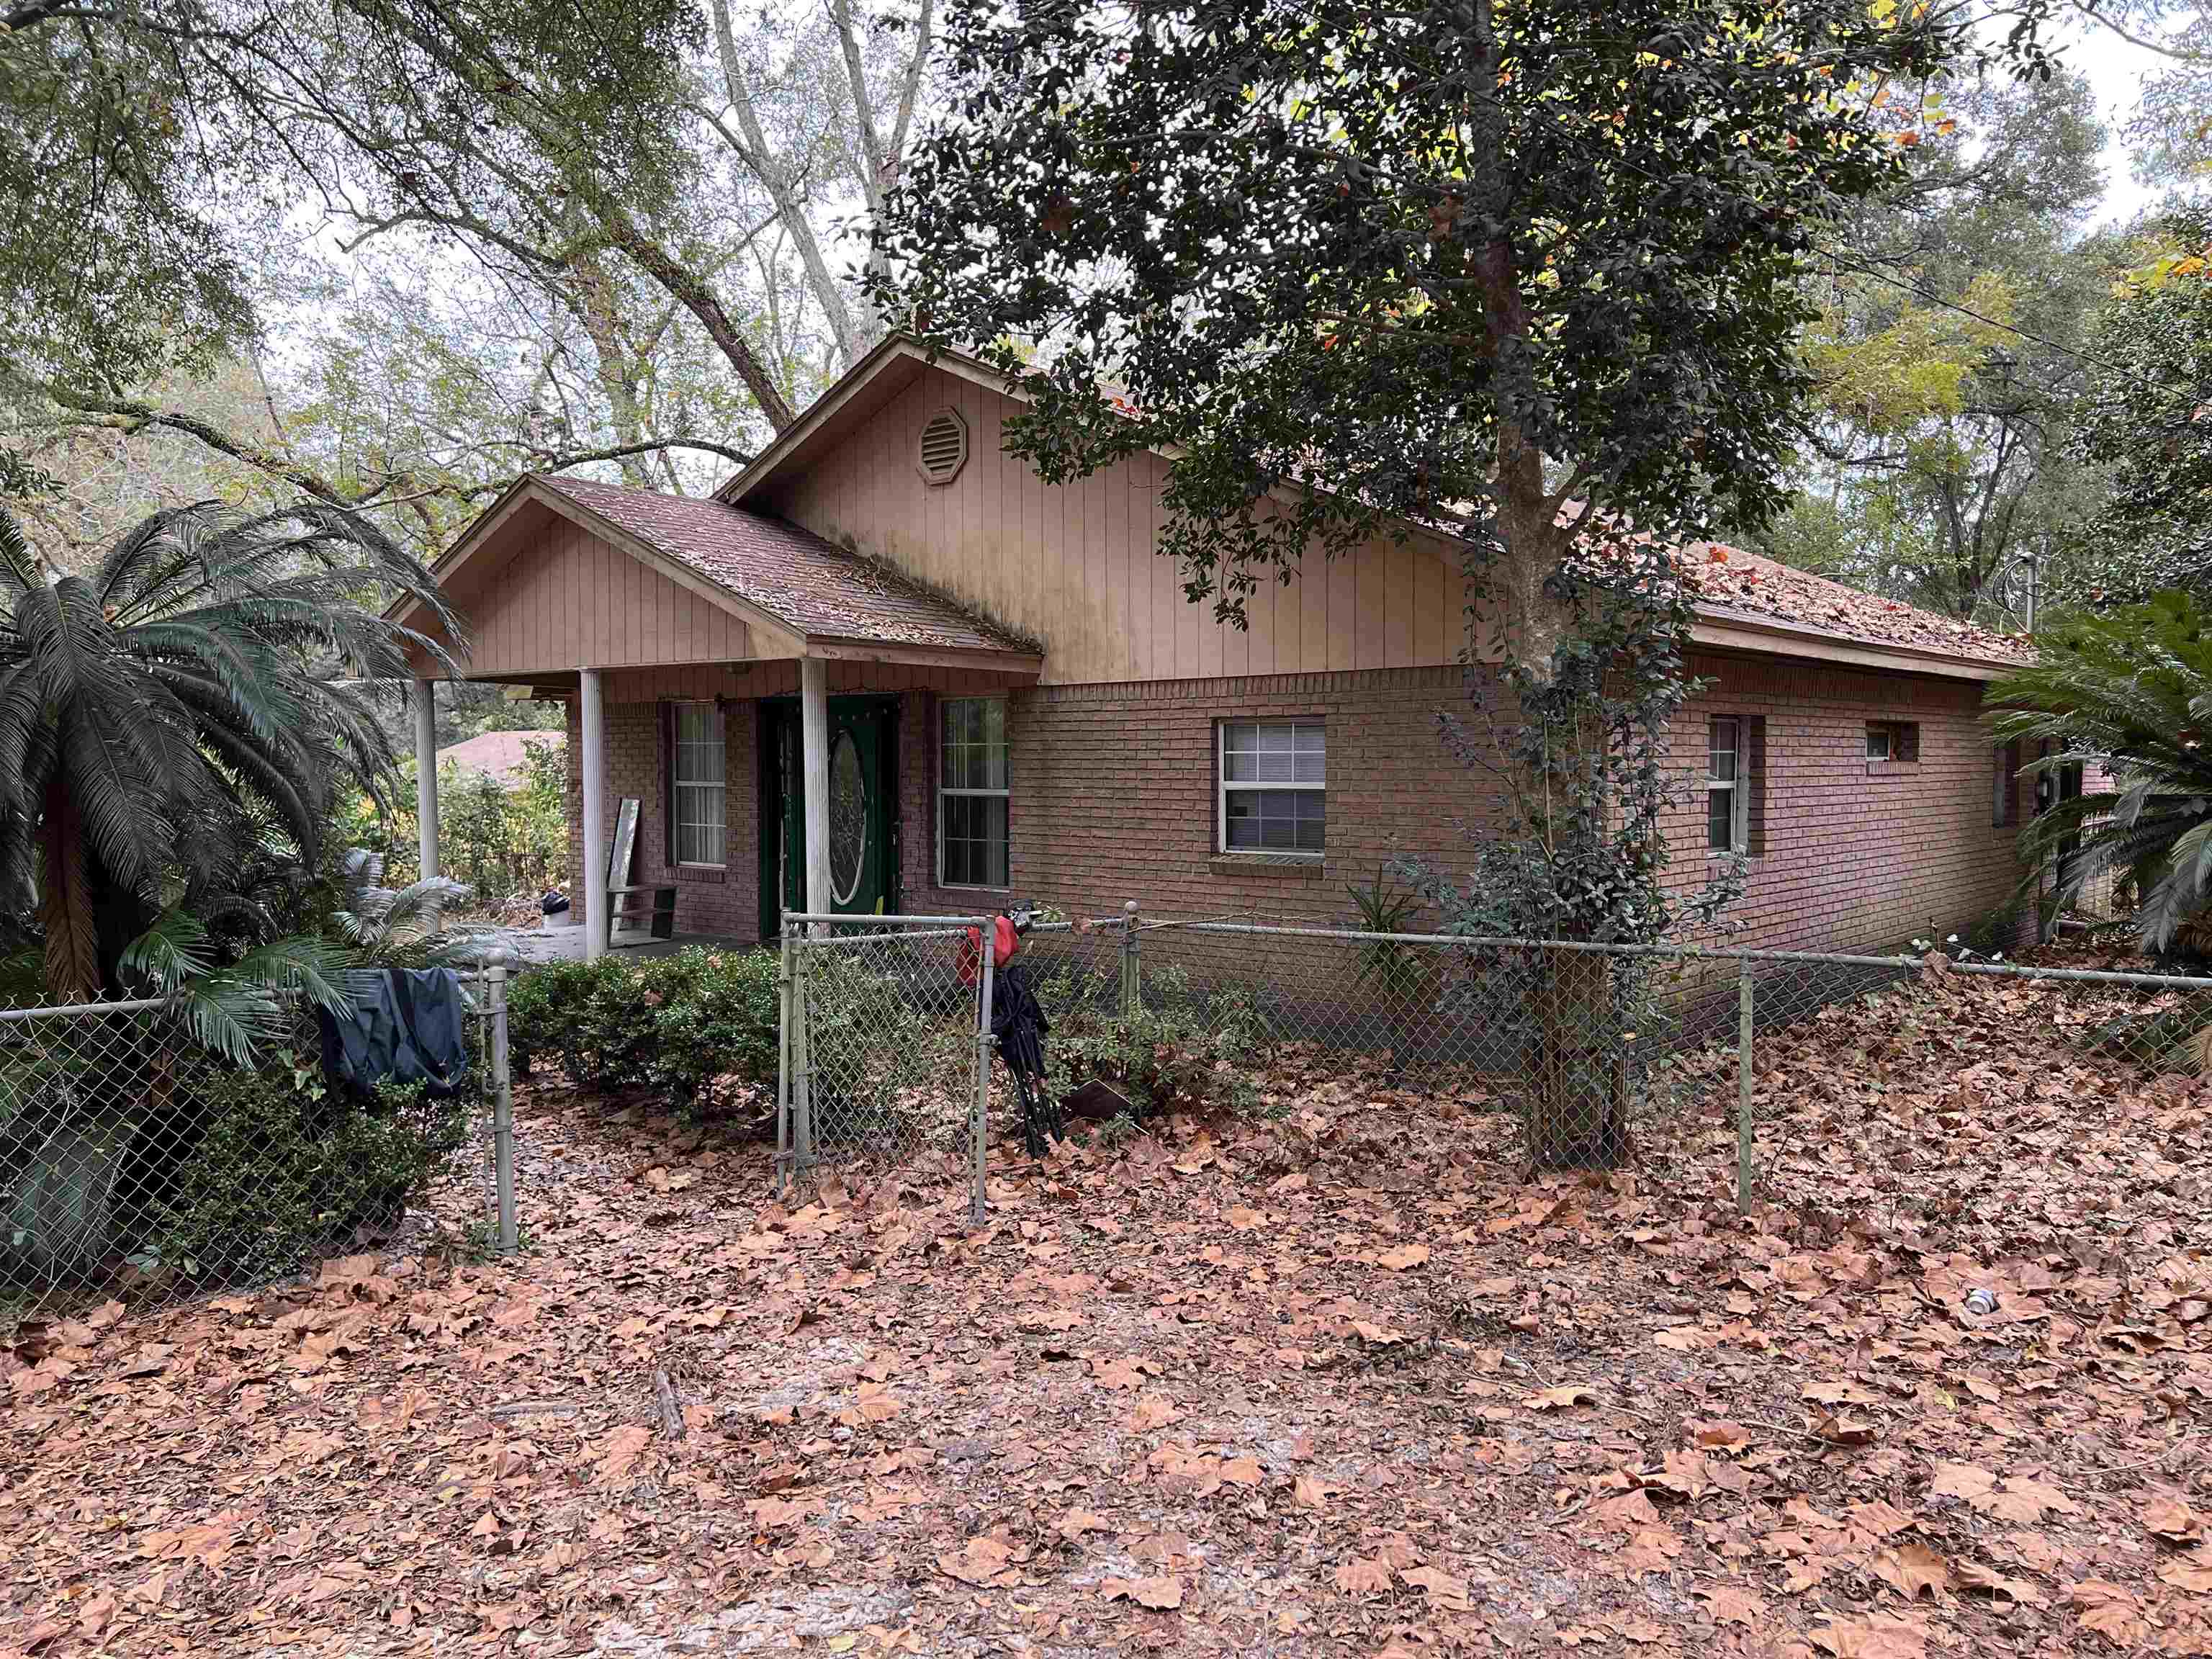 Home is a CASH ONLY sale. Home will need work, but if you're a handyman and looking for a deal here it is. Home has a lot of potential property appraiser site says two bedrooms but can easily be a 3/2